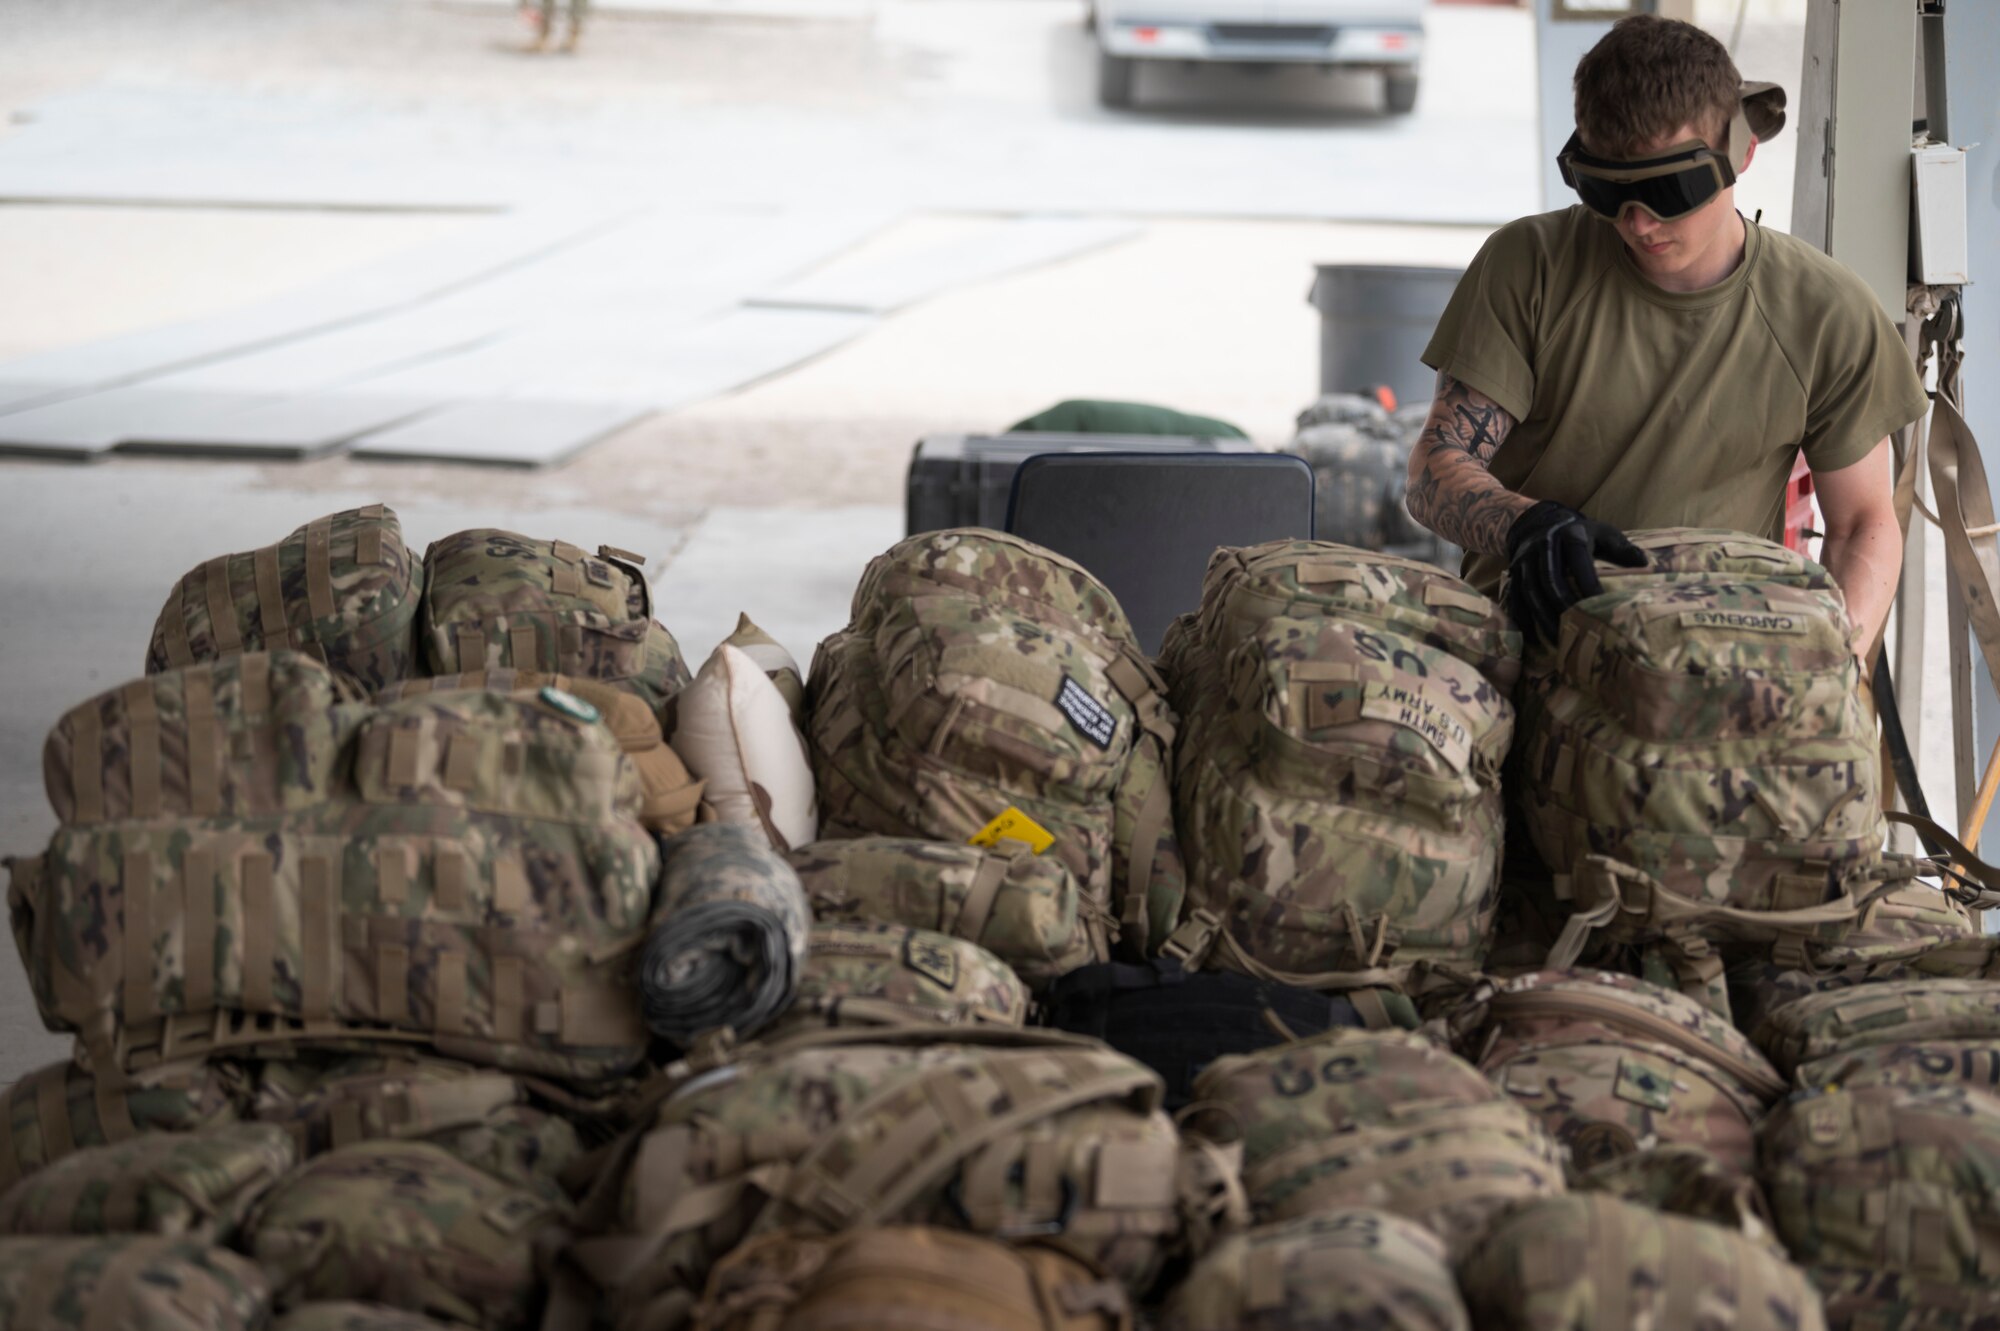 U.S. Air Force Senior Airman Clayton Ford, 386th Expeditionary Logistics Readiness Squadron passenger service representative, assembles a luggage pallet during an Emergency Deployment Rapid Exercise at the 386th ELRS passenger terminal at Ali Al Salem Air Base, Kuwait, August 10, 2022. In order for the team to ensure rapid mobility exercises like this are a success, every member of the team needs to be well trained at each part of the process, even working multiple parts at the same time. (U.S. Air Force photo by Staff Sgt. Dalton Williams)